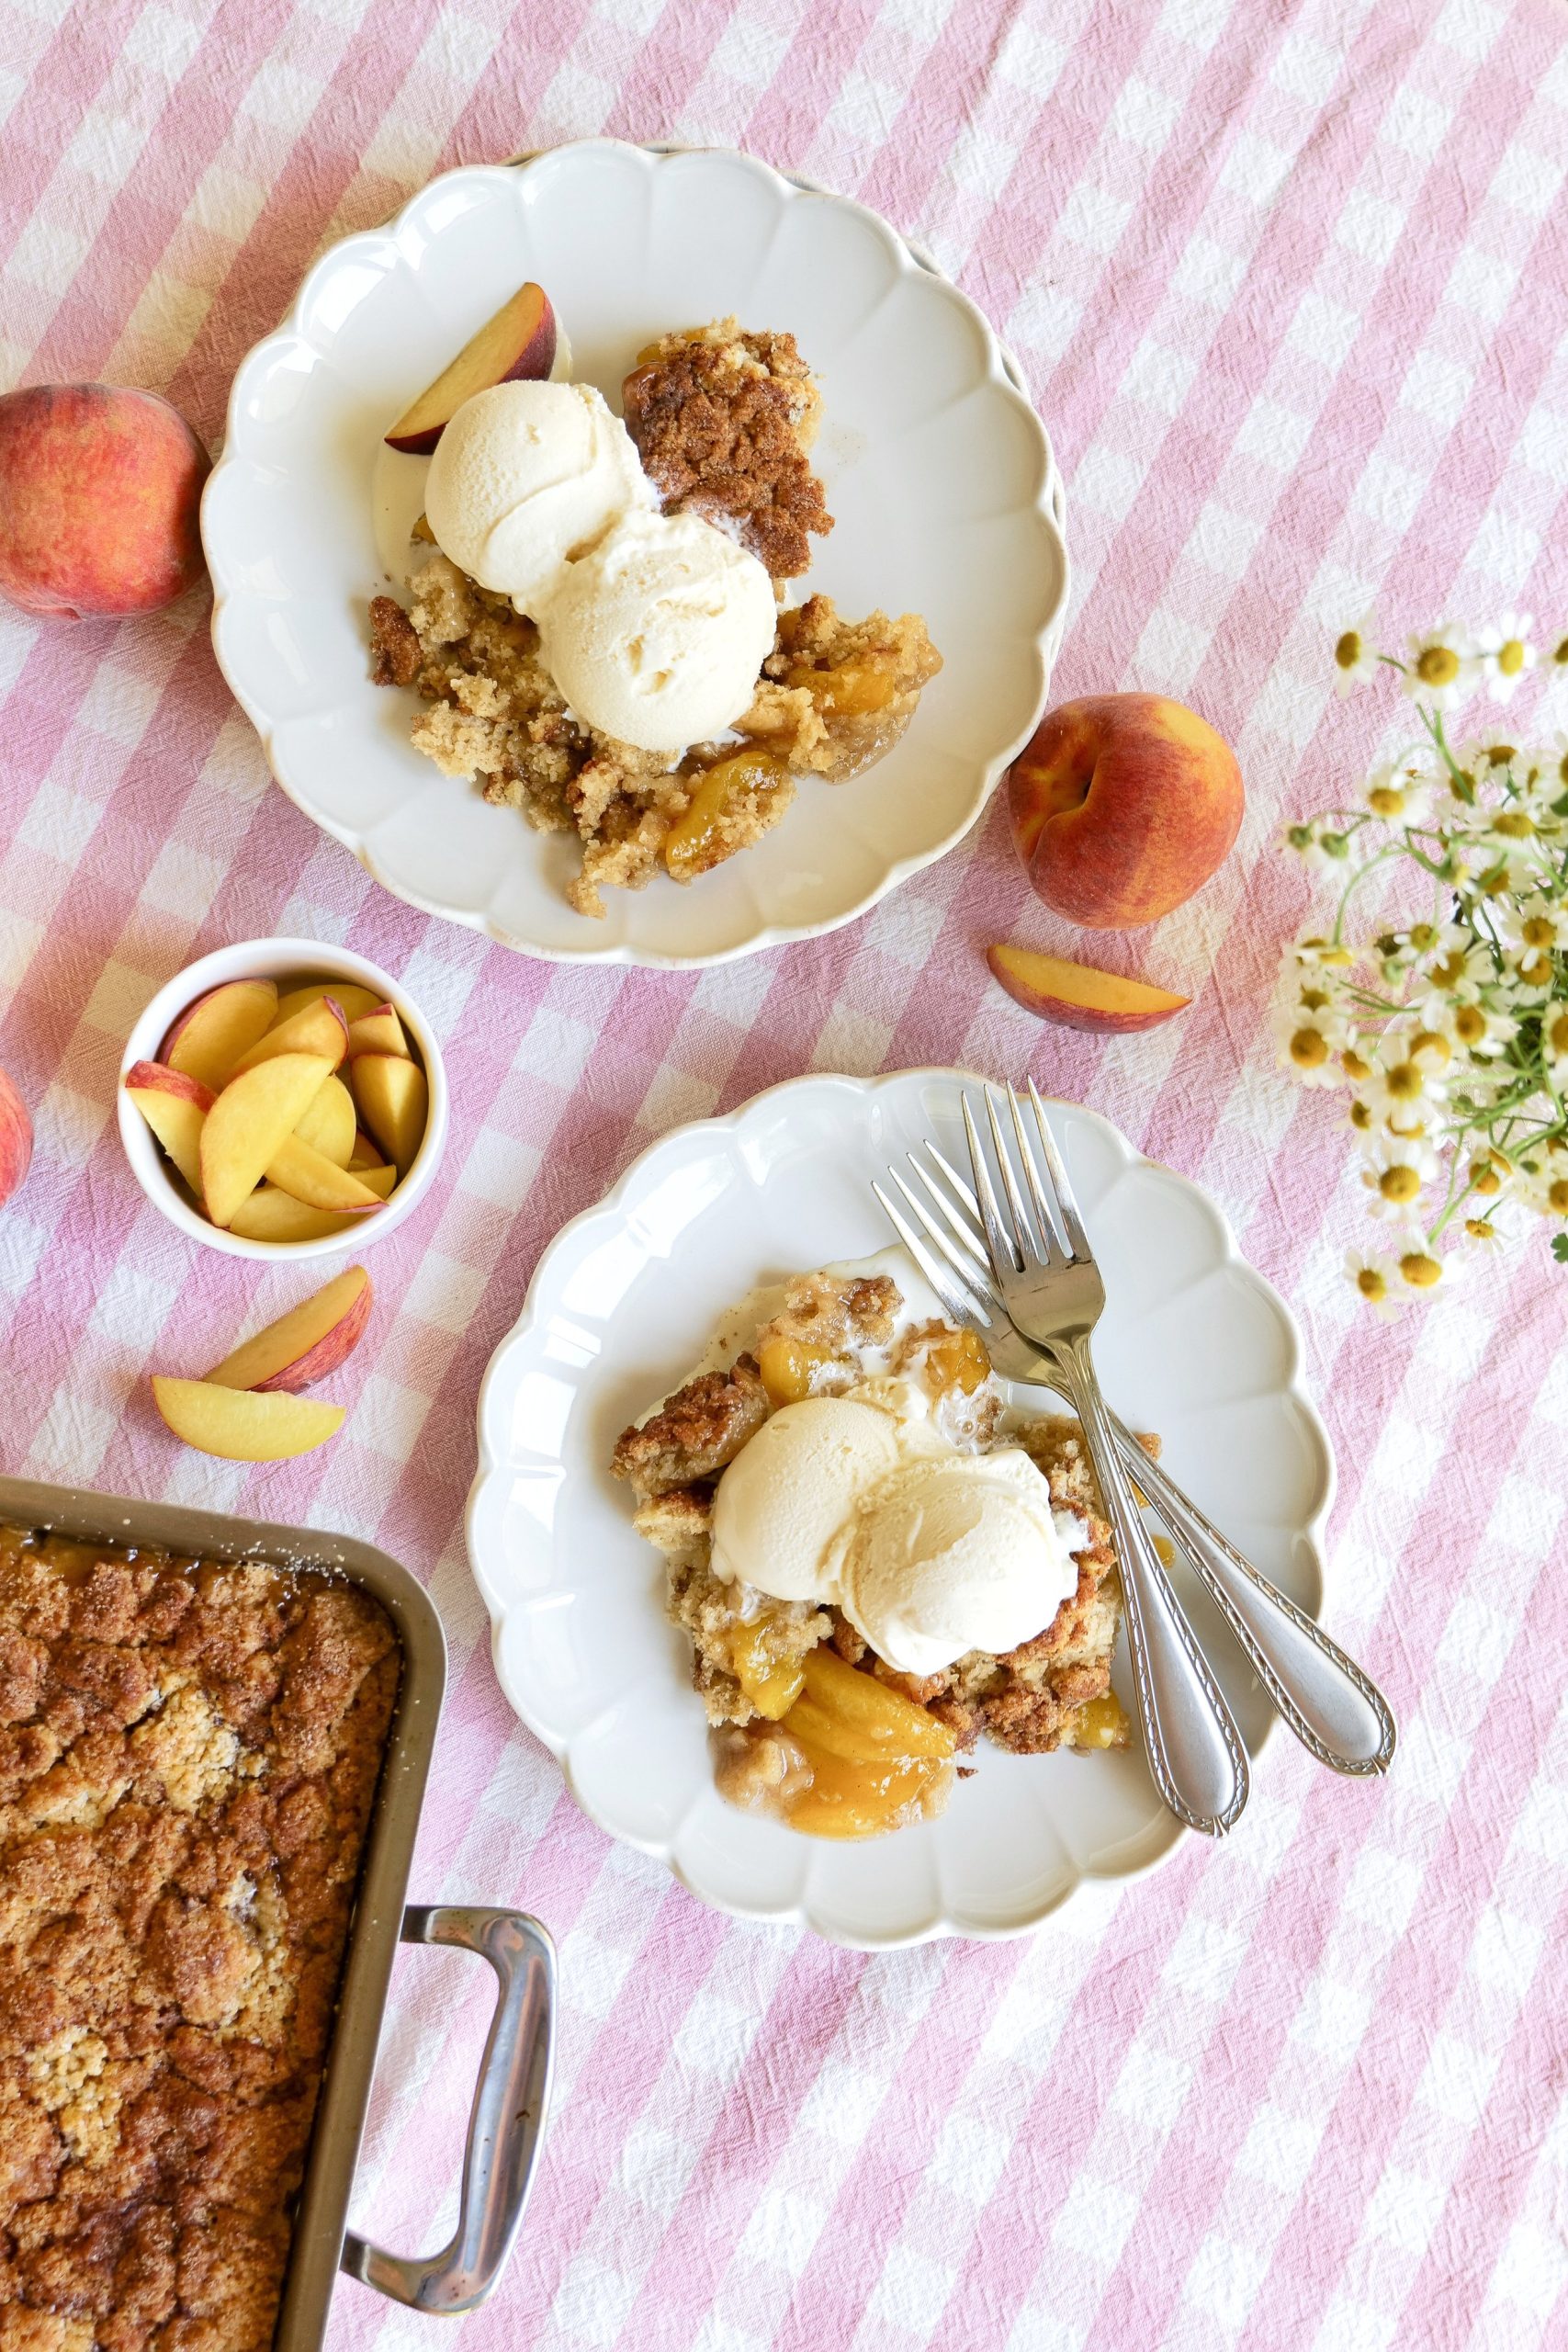 Peach Cobbler Recipe: A Step-by-Step Guide for Perfect Dessert Every Time